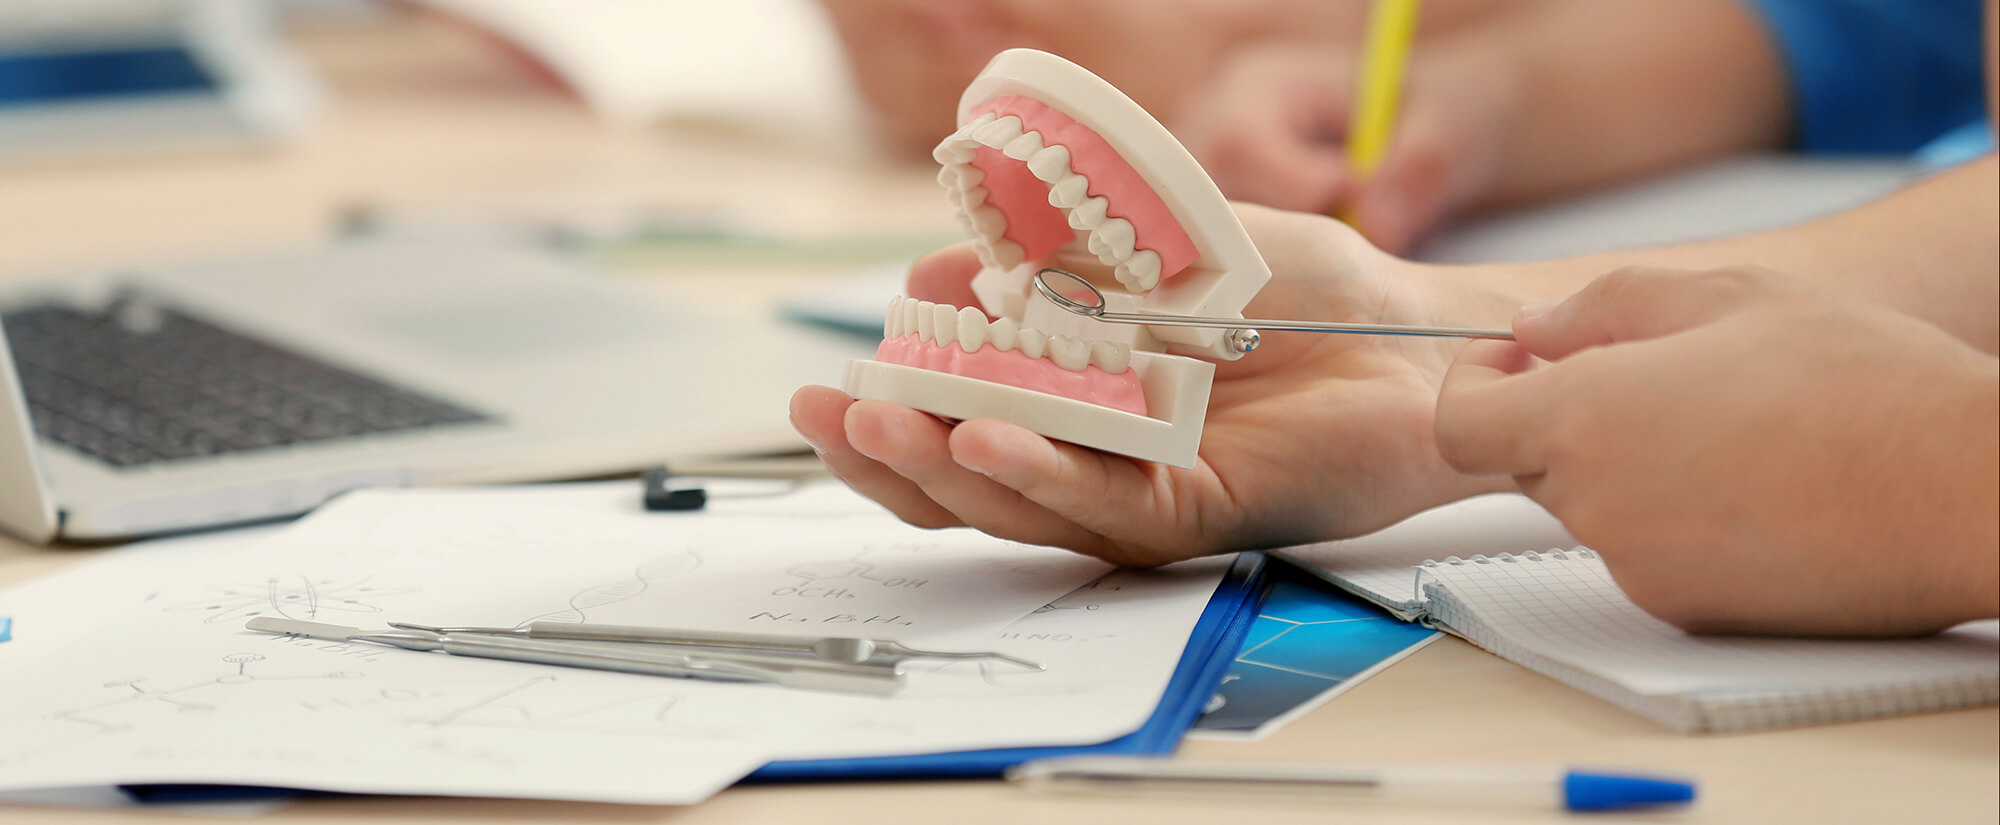 Close-up photo of someone practicing a dental exam on a handheld set of plastic teeth.